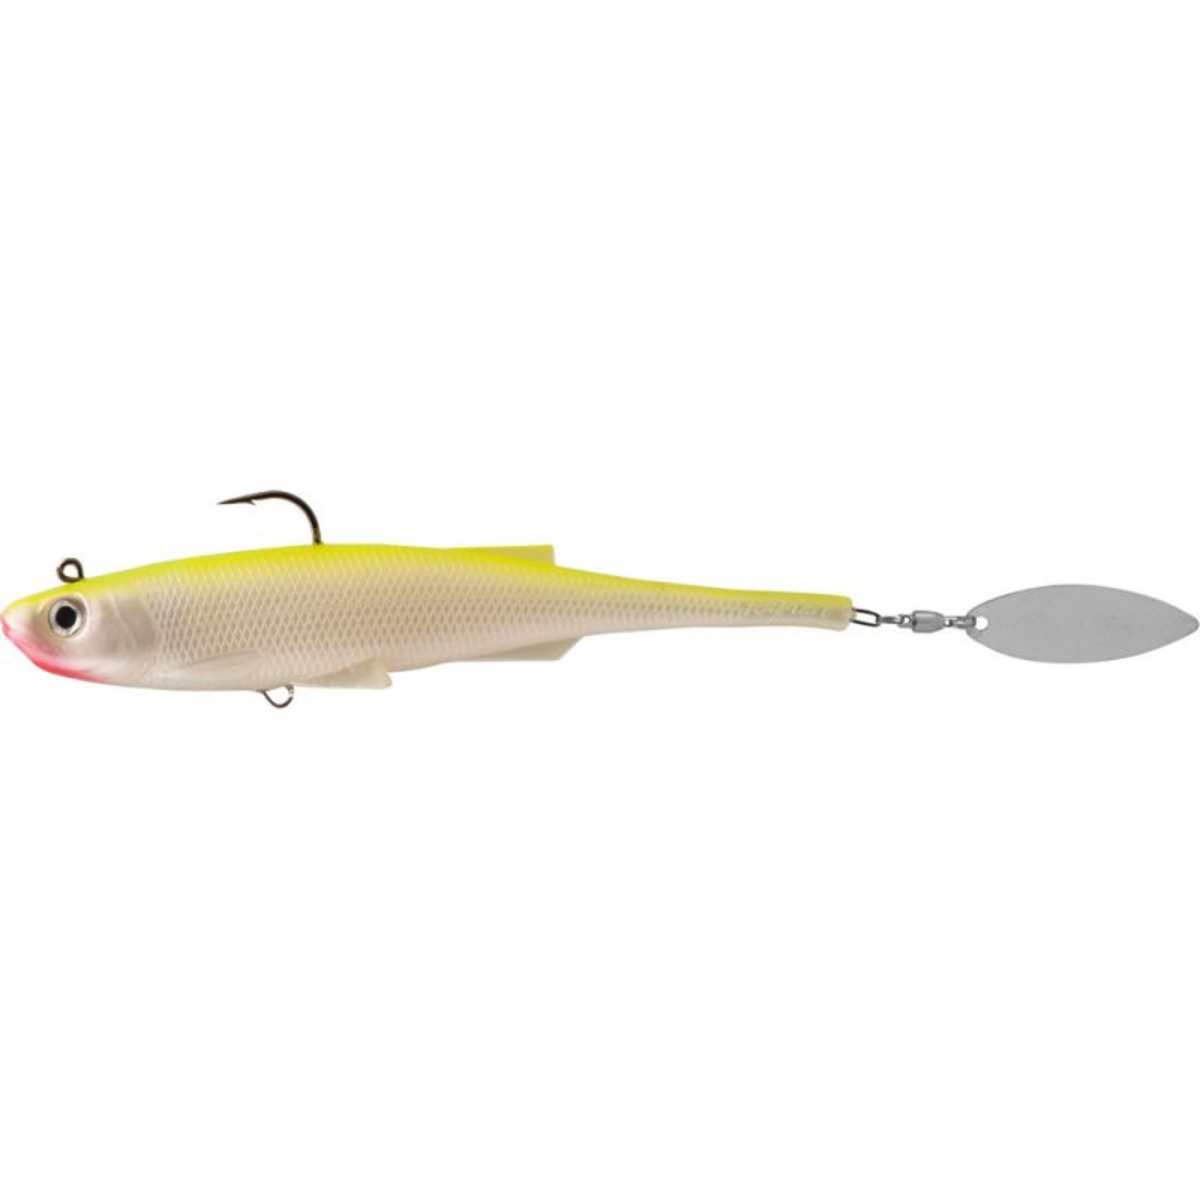 Rapture Mad Spintail Shad - 60.0 g - 150 mm - UV-S